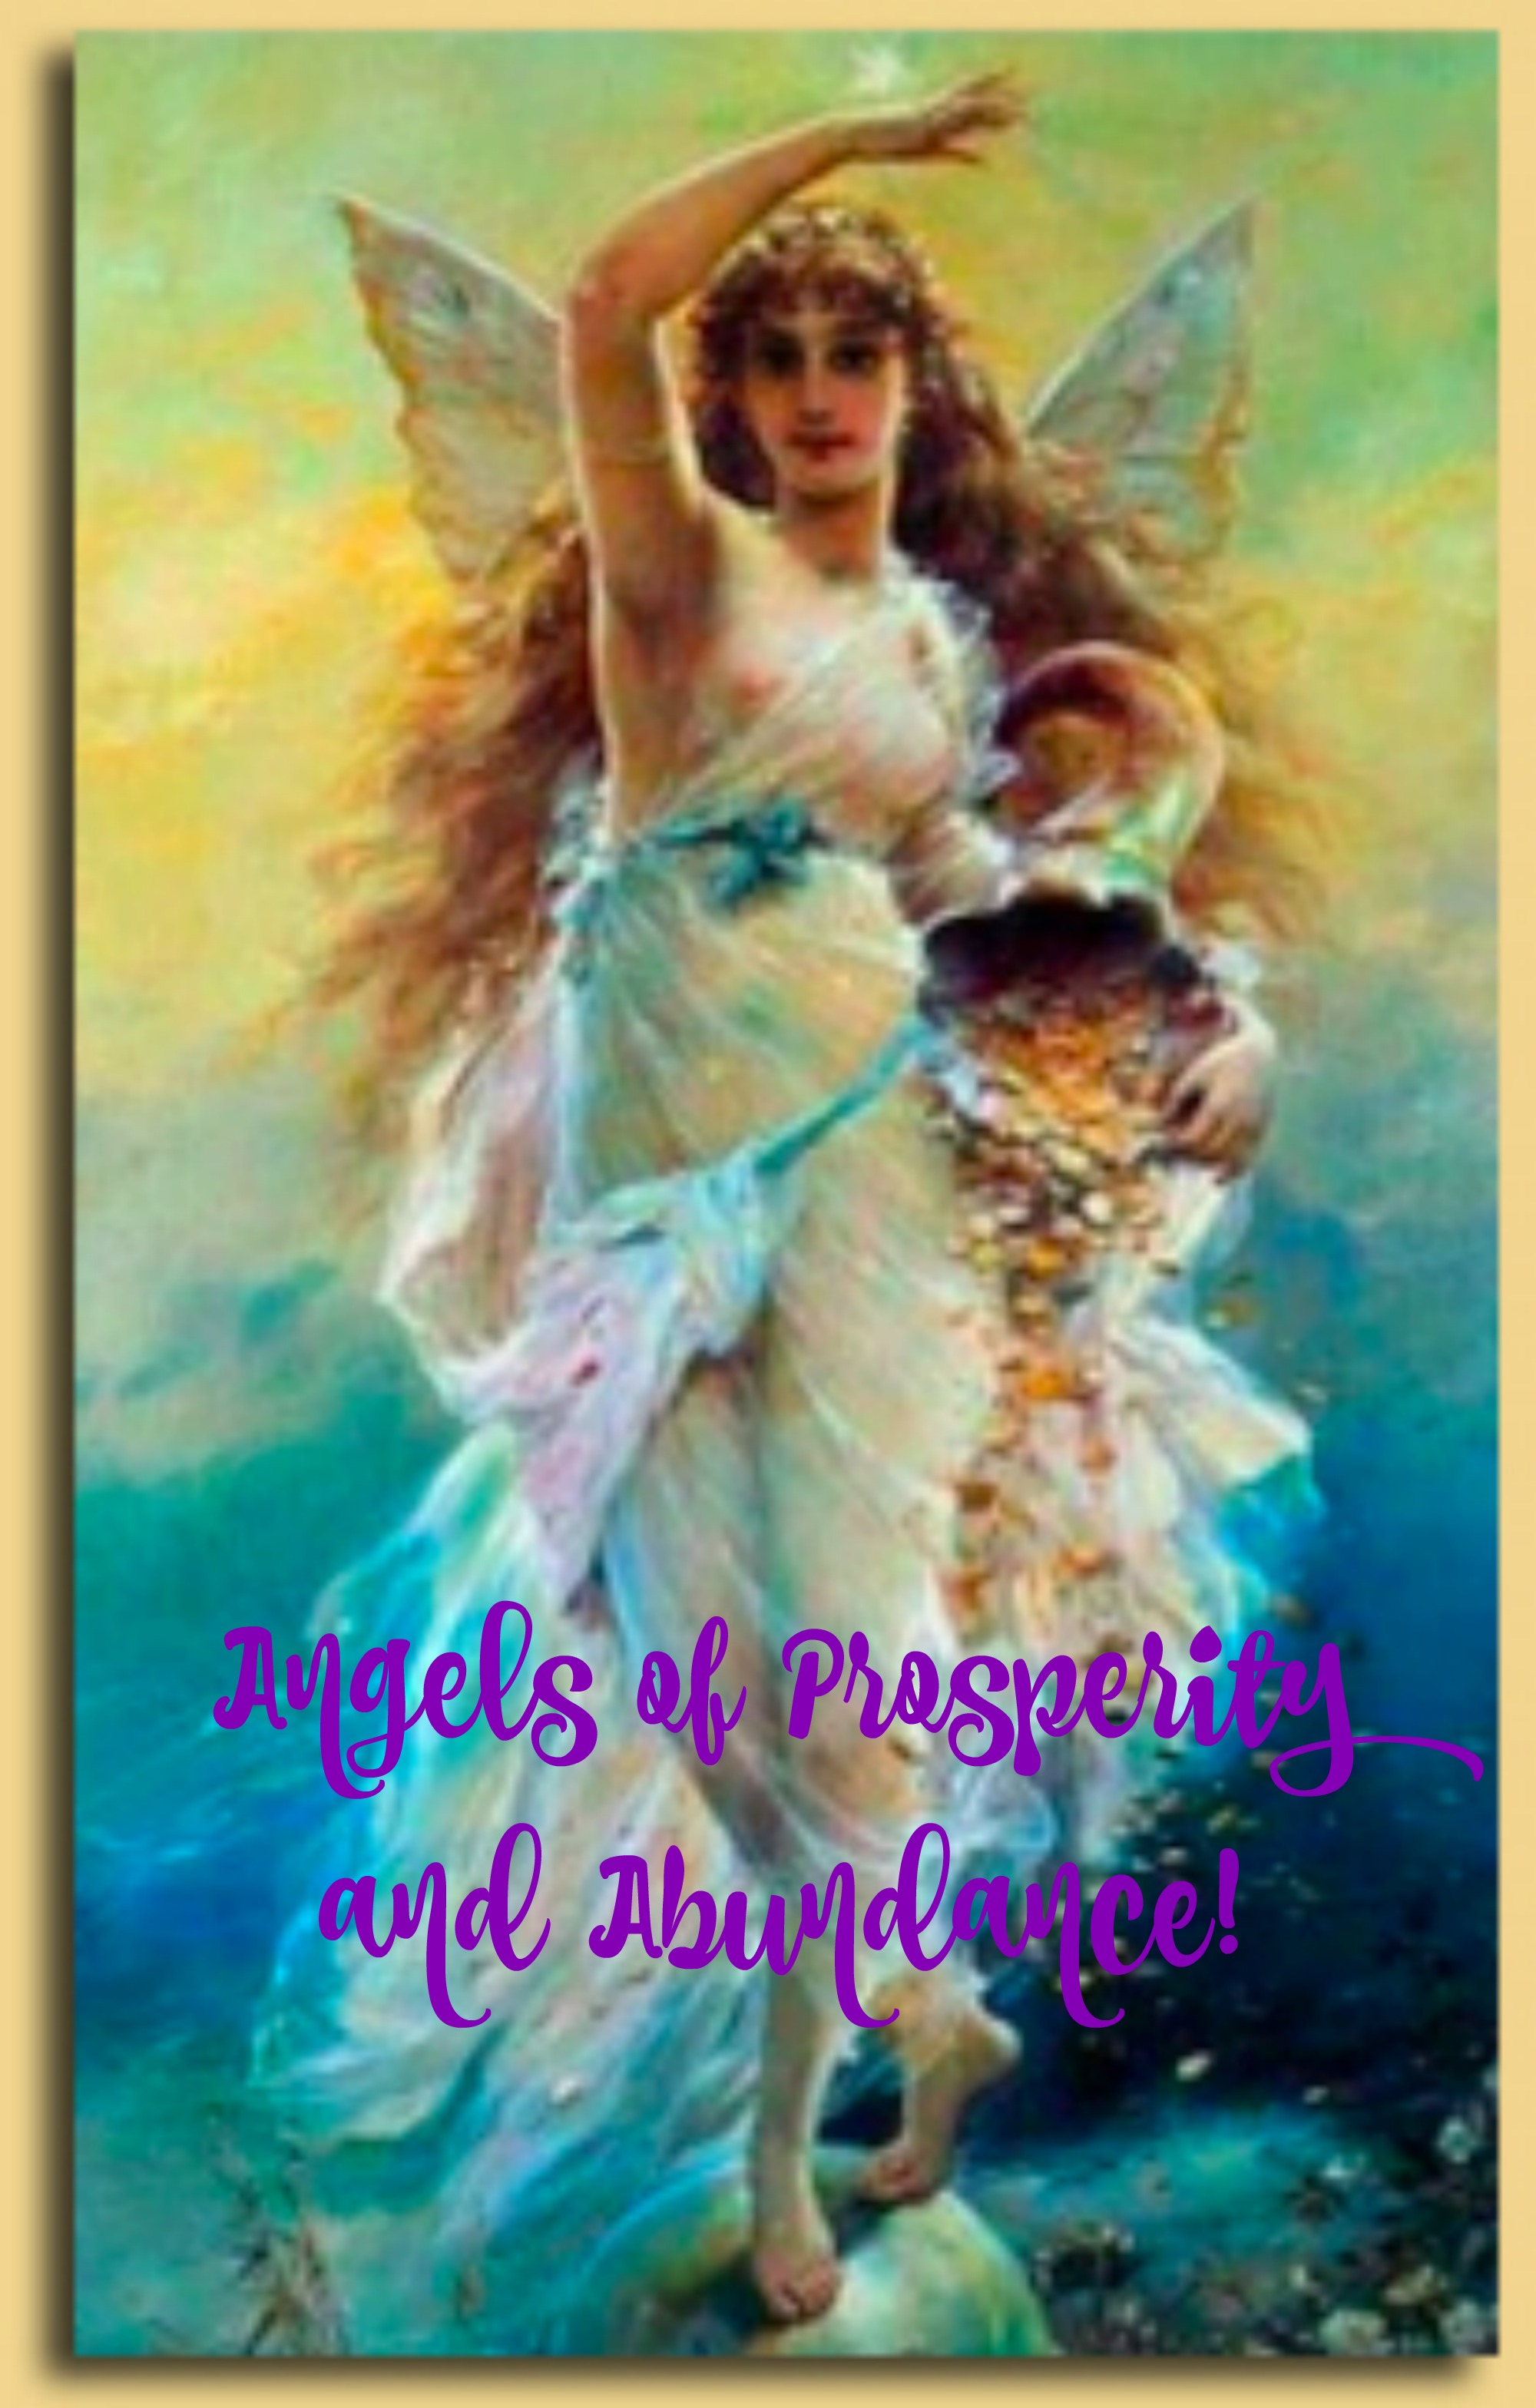 Angels and prosperity photo